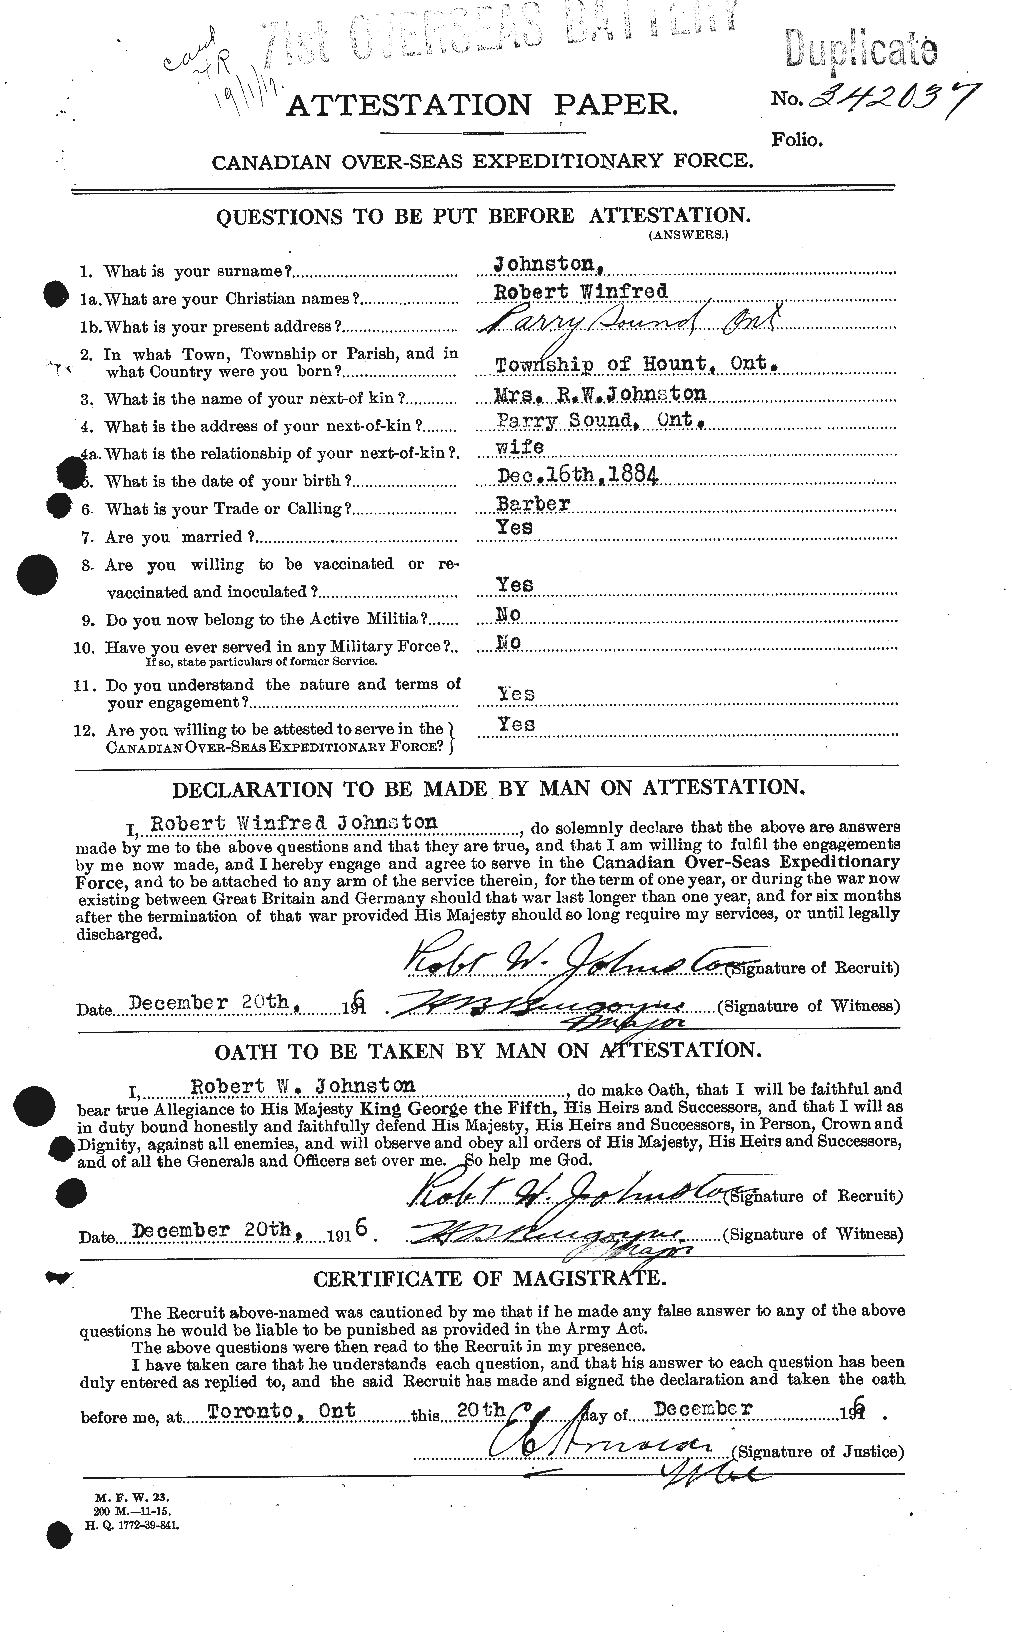 Personnel Records of the First World War - CEF 427042a